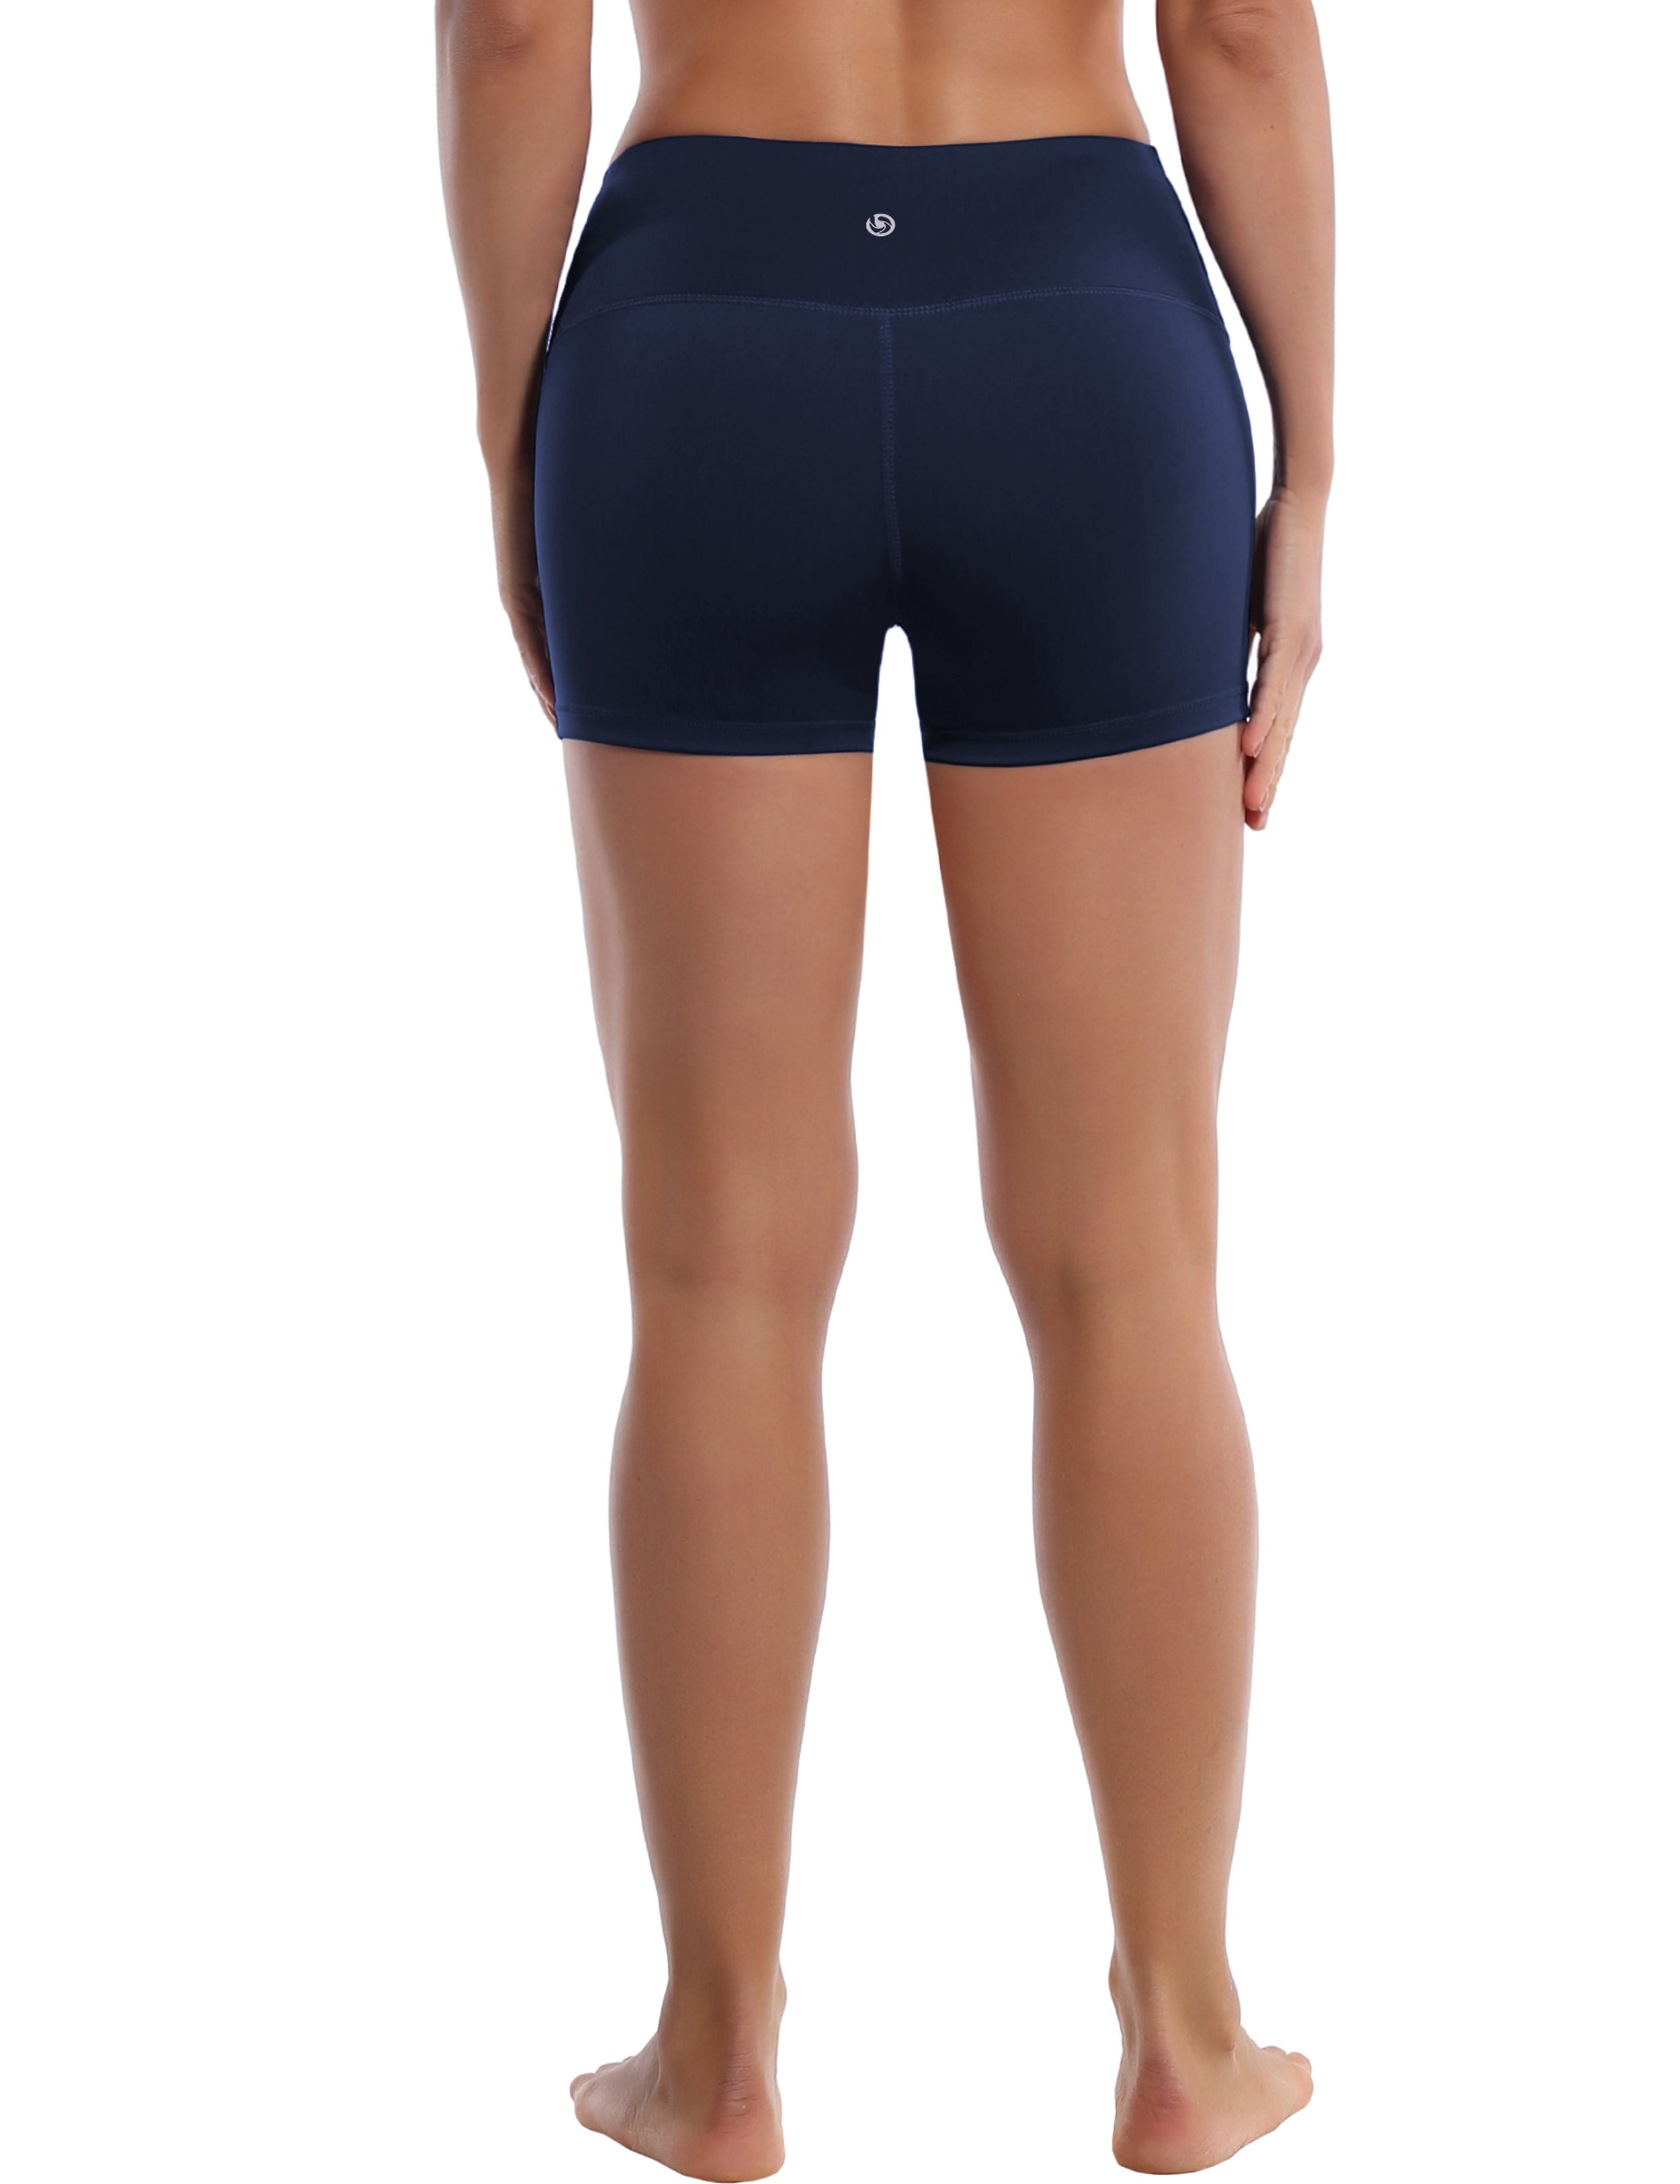 2.5" Yoga Shorts darknavy Softest-ever fabric High elasticity High density 4-way stretch Fabric doesn't attract lint easily No see-through Moisture-wicking Machine wash 75% Nylon, 25% Spandex